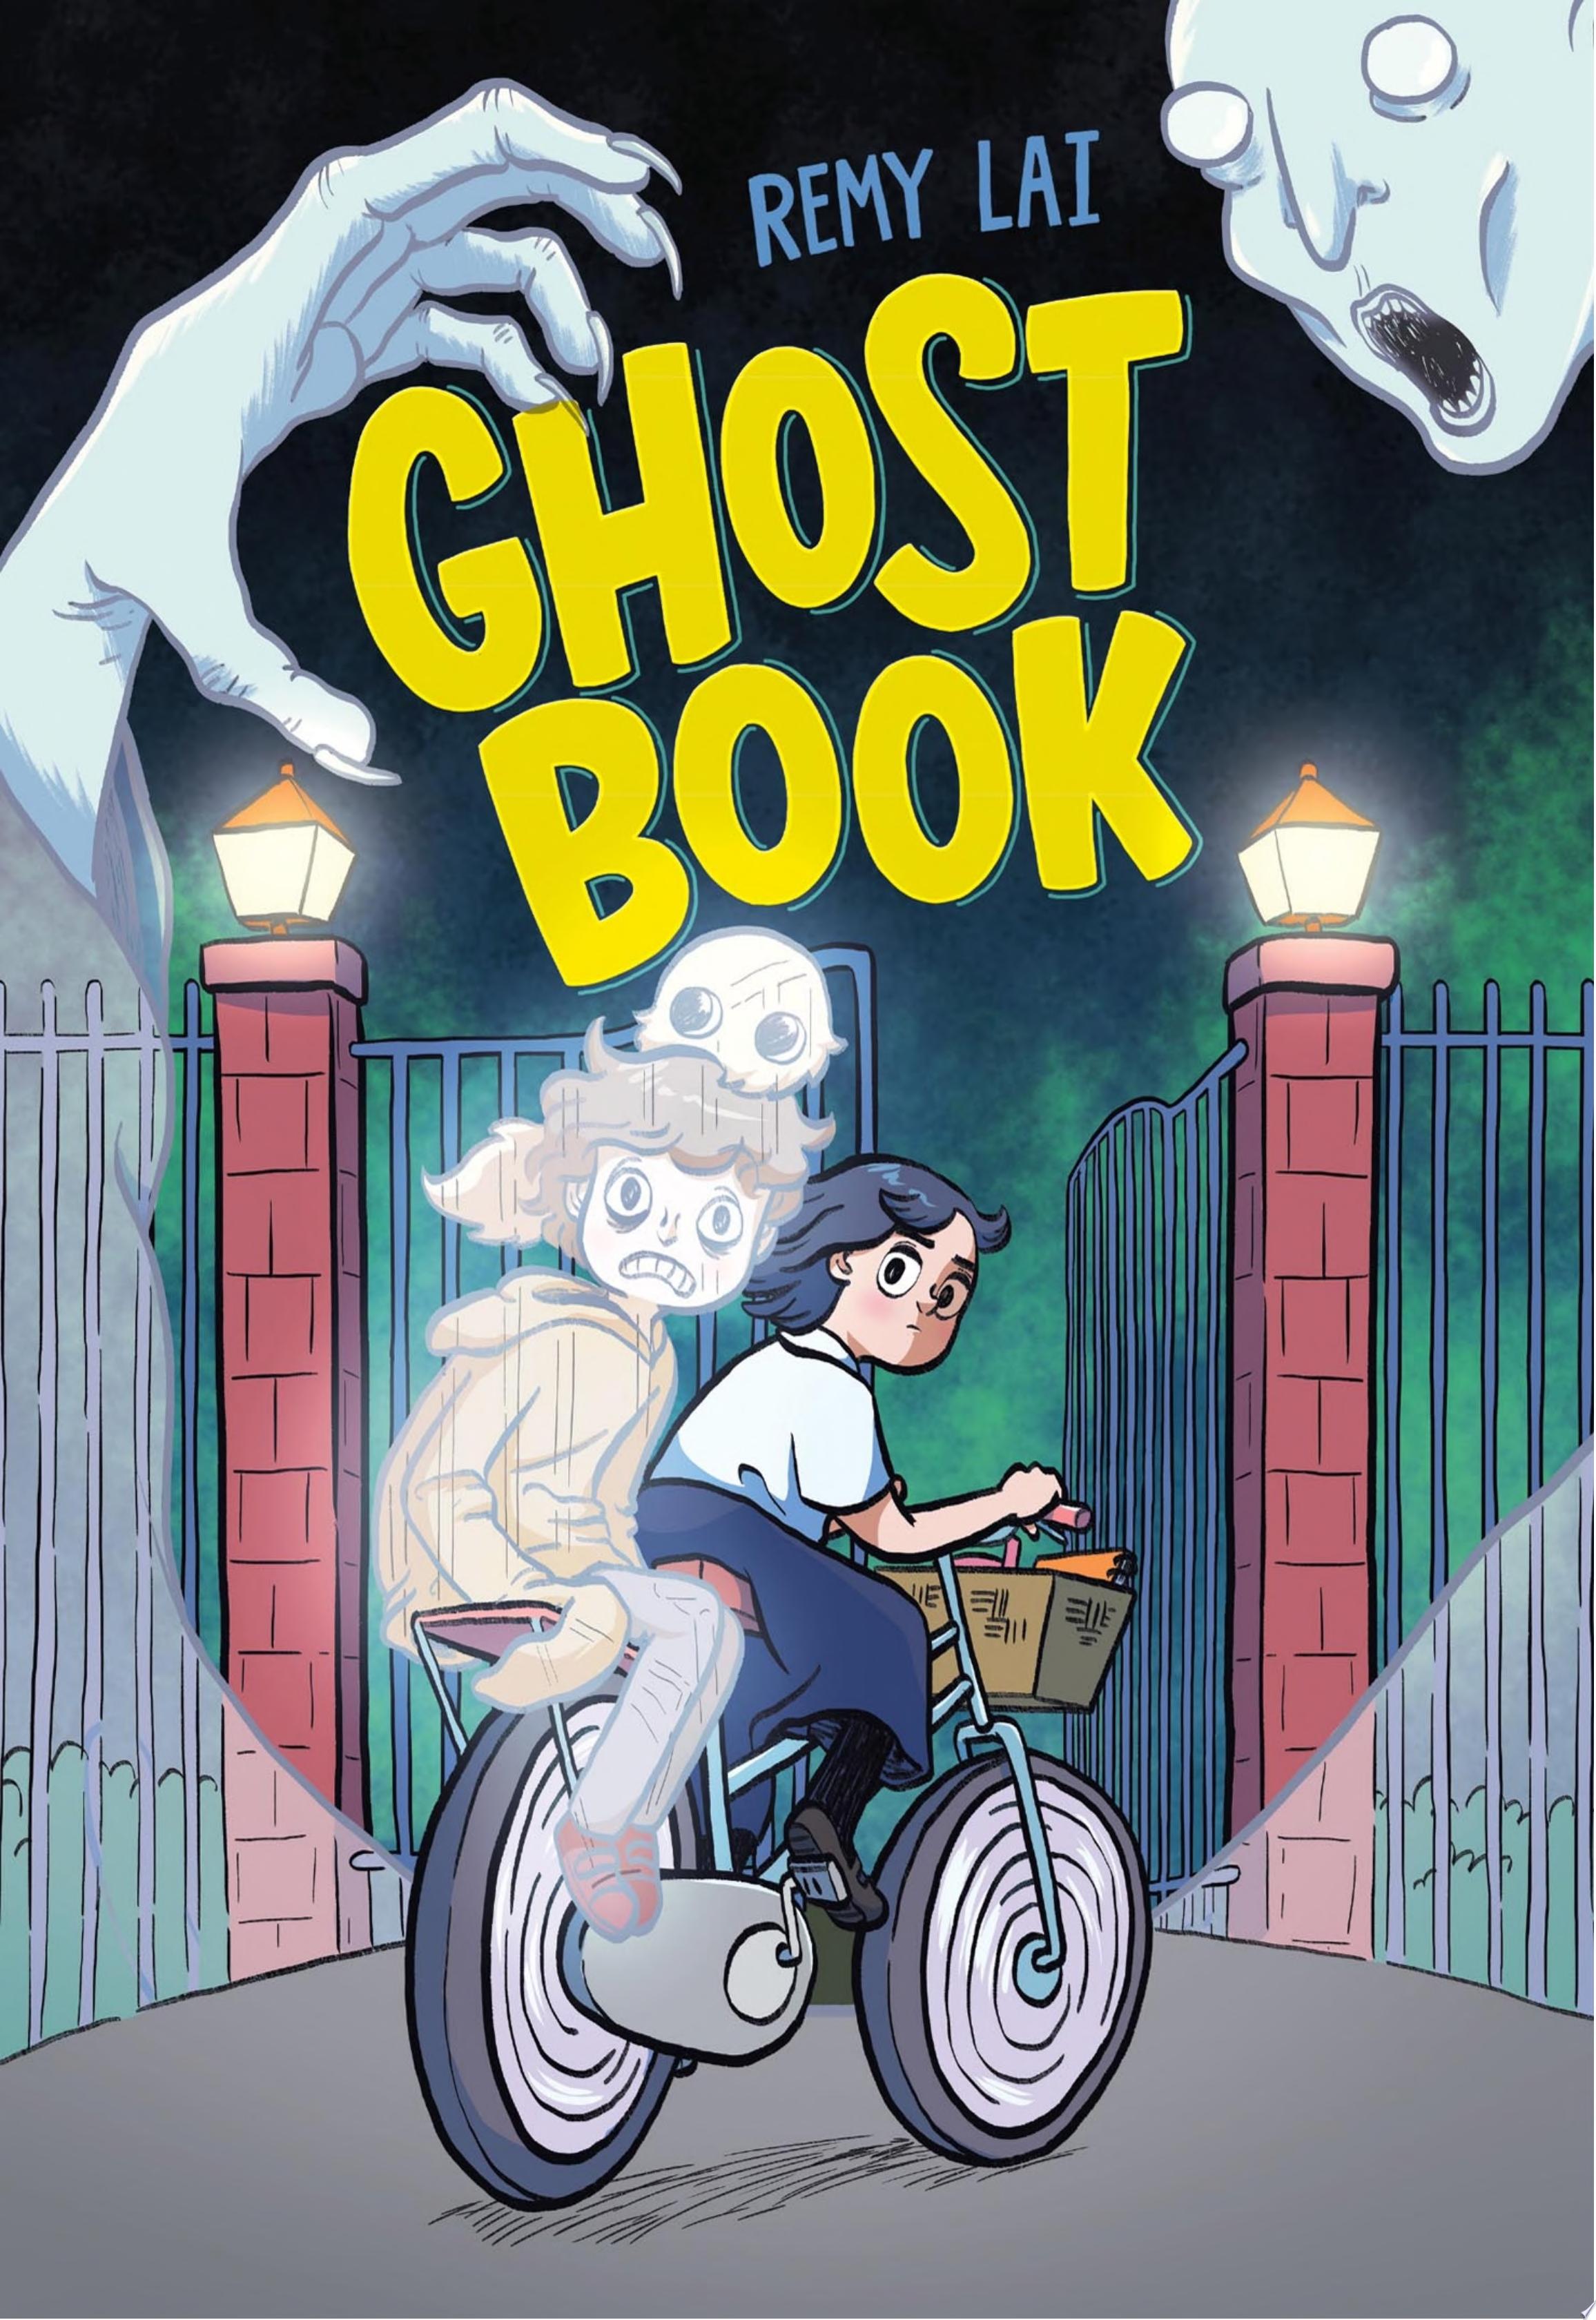 Image for "Ghost Book"